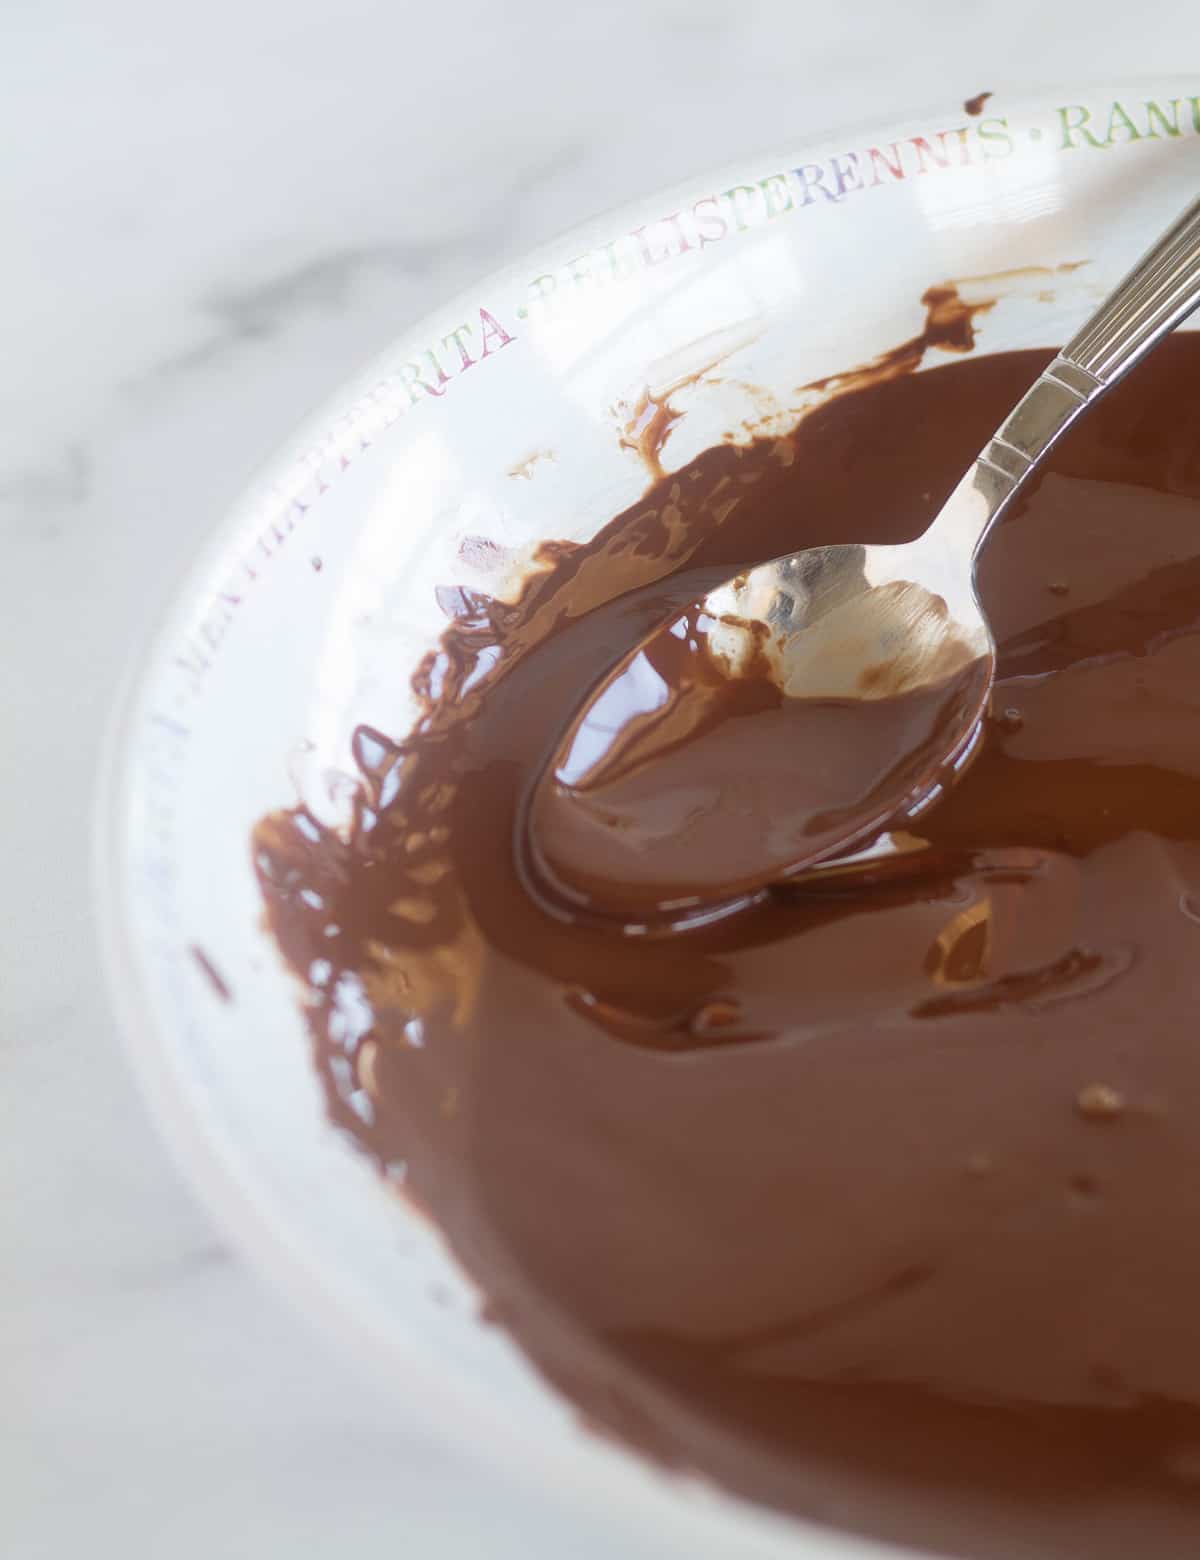 melted chocolate in a white bowl.